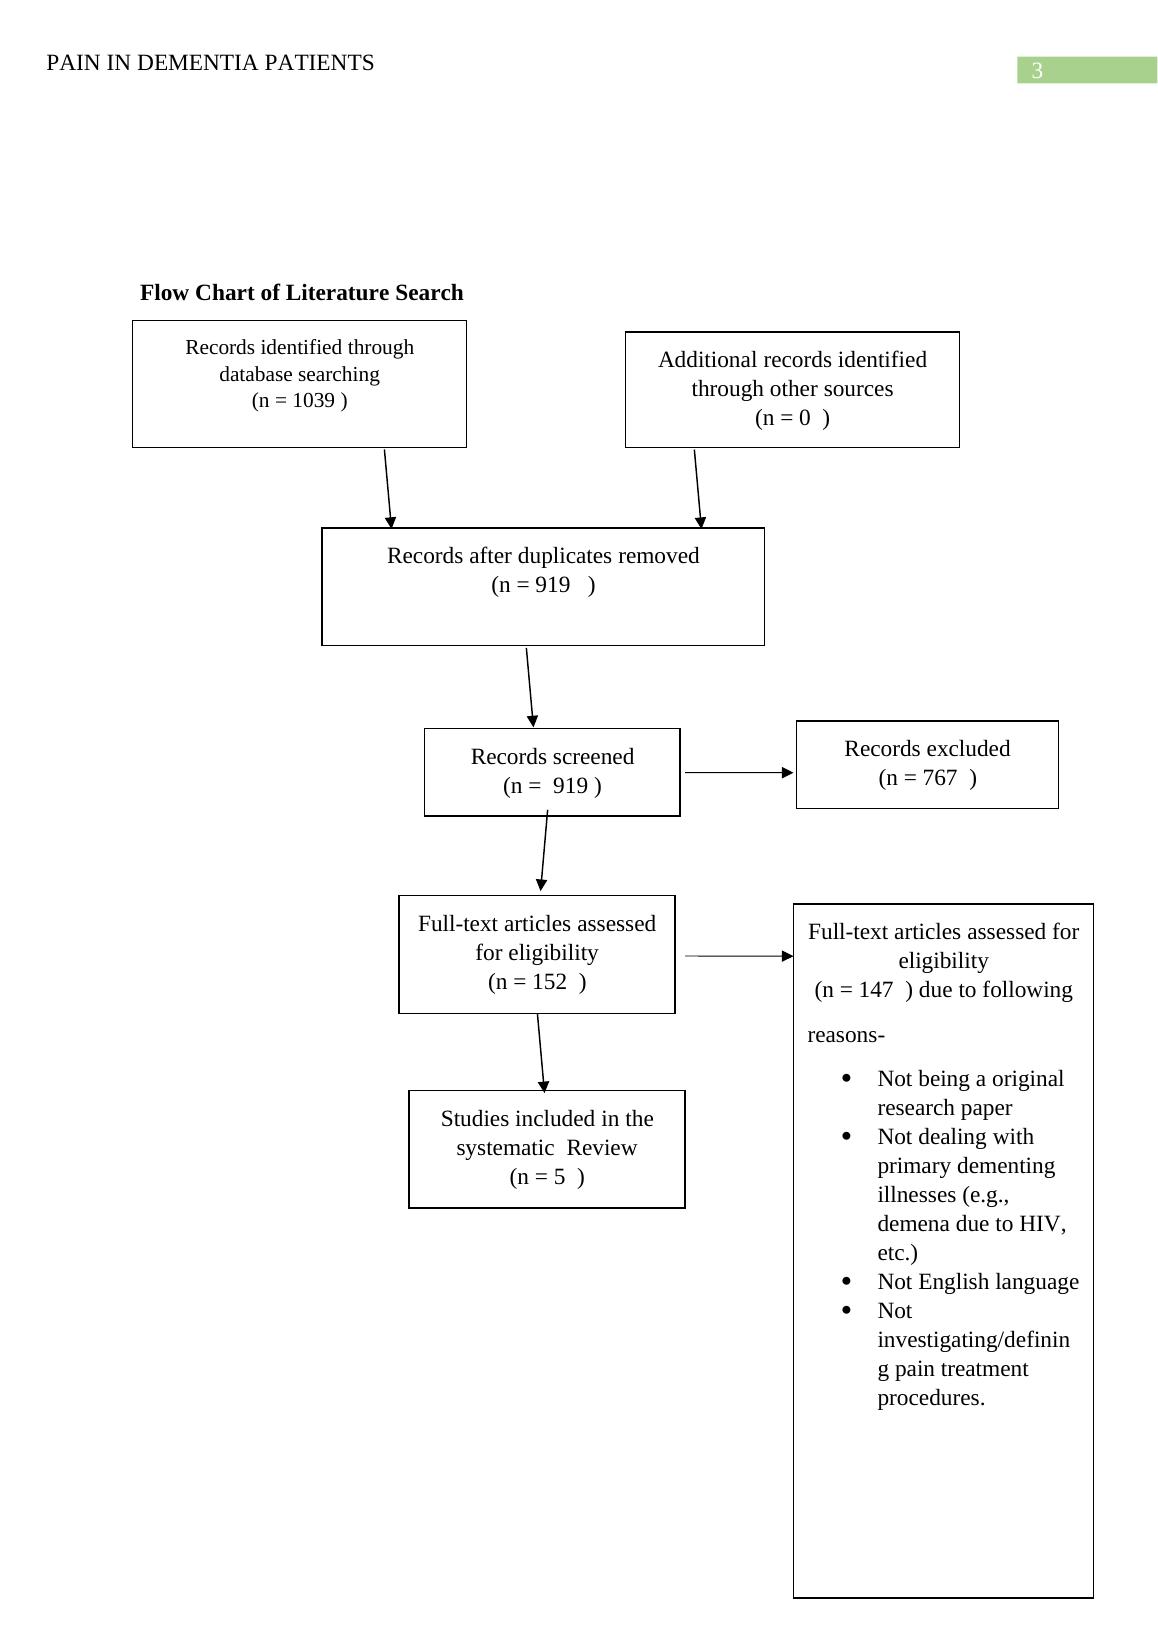 Pain in Dementia Patients: A Systematic Literature Review_4